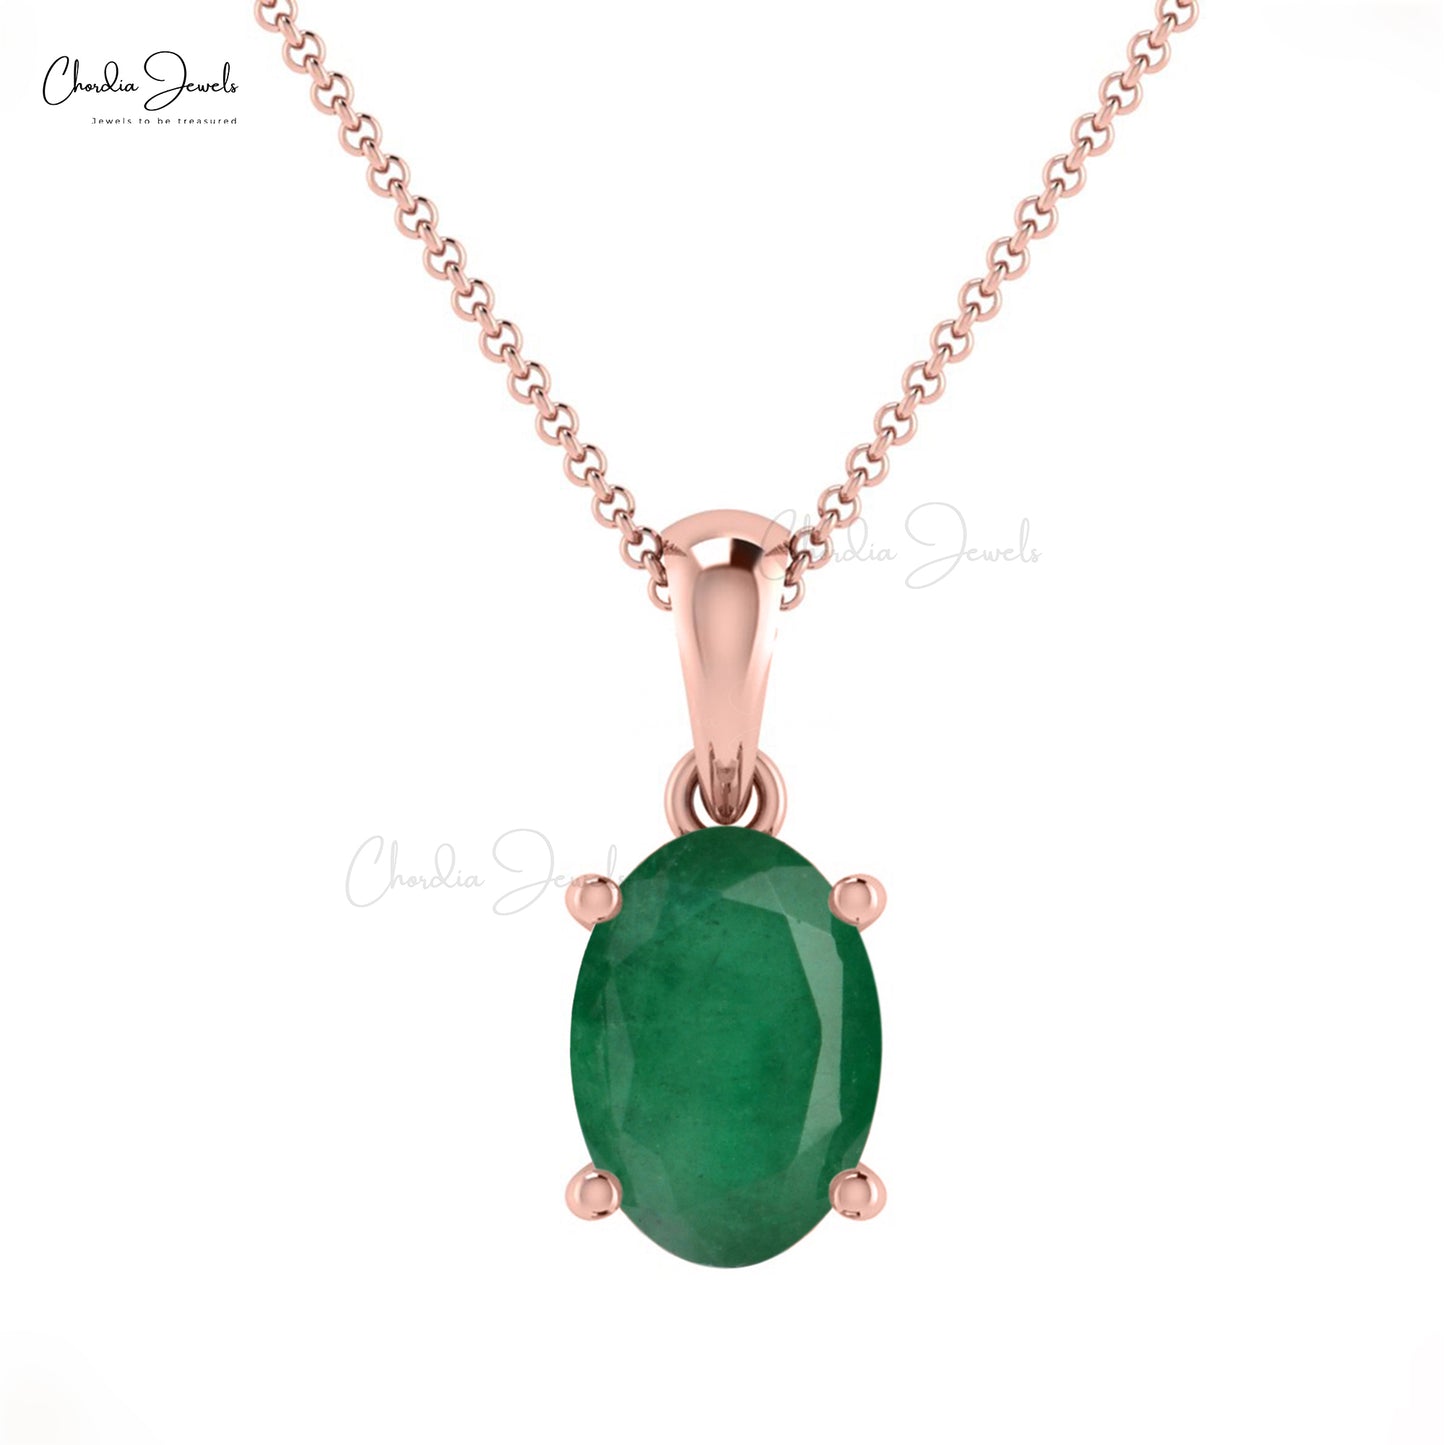 Solitaire 0.72ct Green Emerald Pendant 14k Real Gold Oval Gemstone Pendant For Birthday Gift 